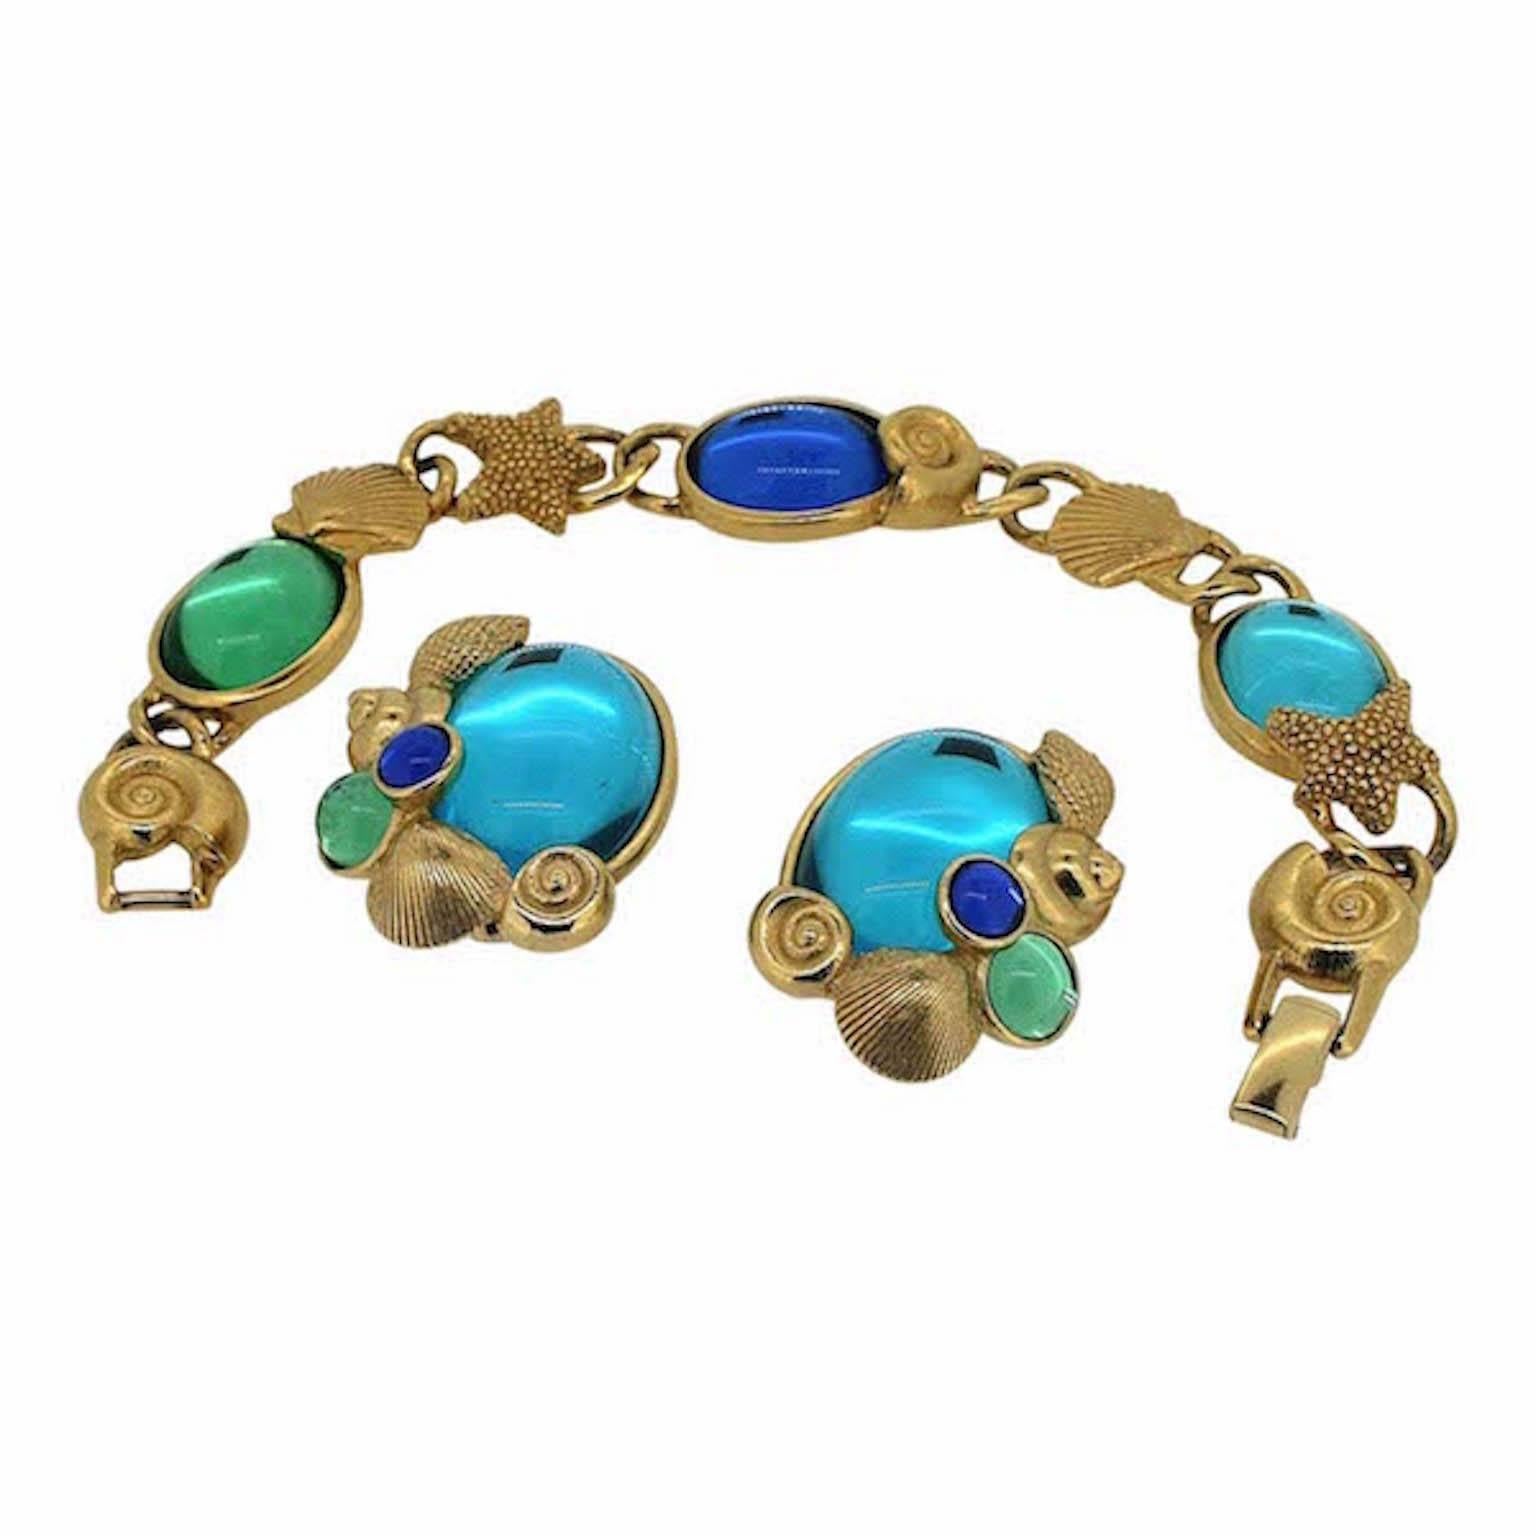 This whimsical and pretty jewellery set was created by Kunio Matsumoto for Trifari in the late 1970s. 
Condition Report:
Excellent
The Details...
This gold tone metal jewellery set features a bracelet and clip on earrings. Each item is detailed with